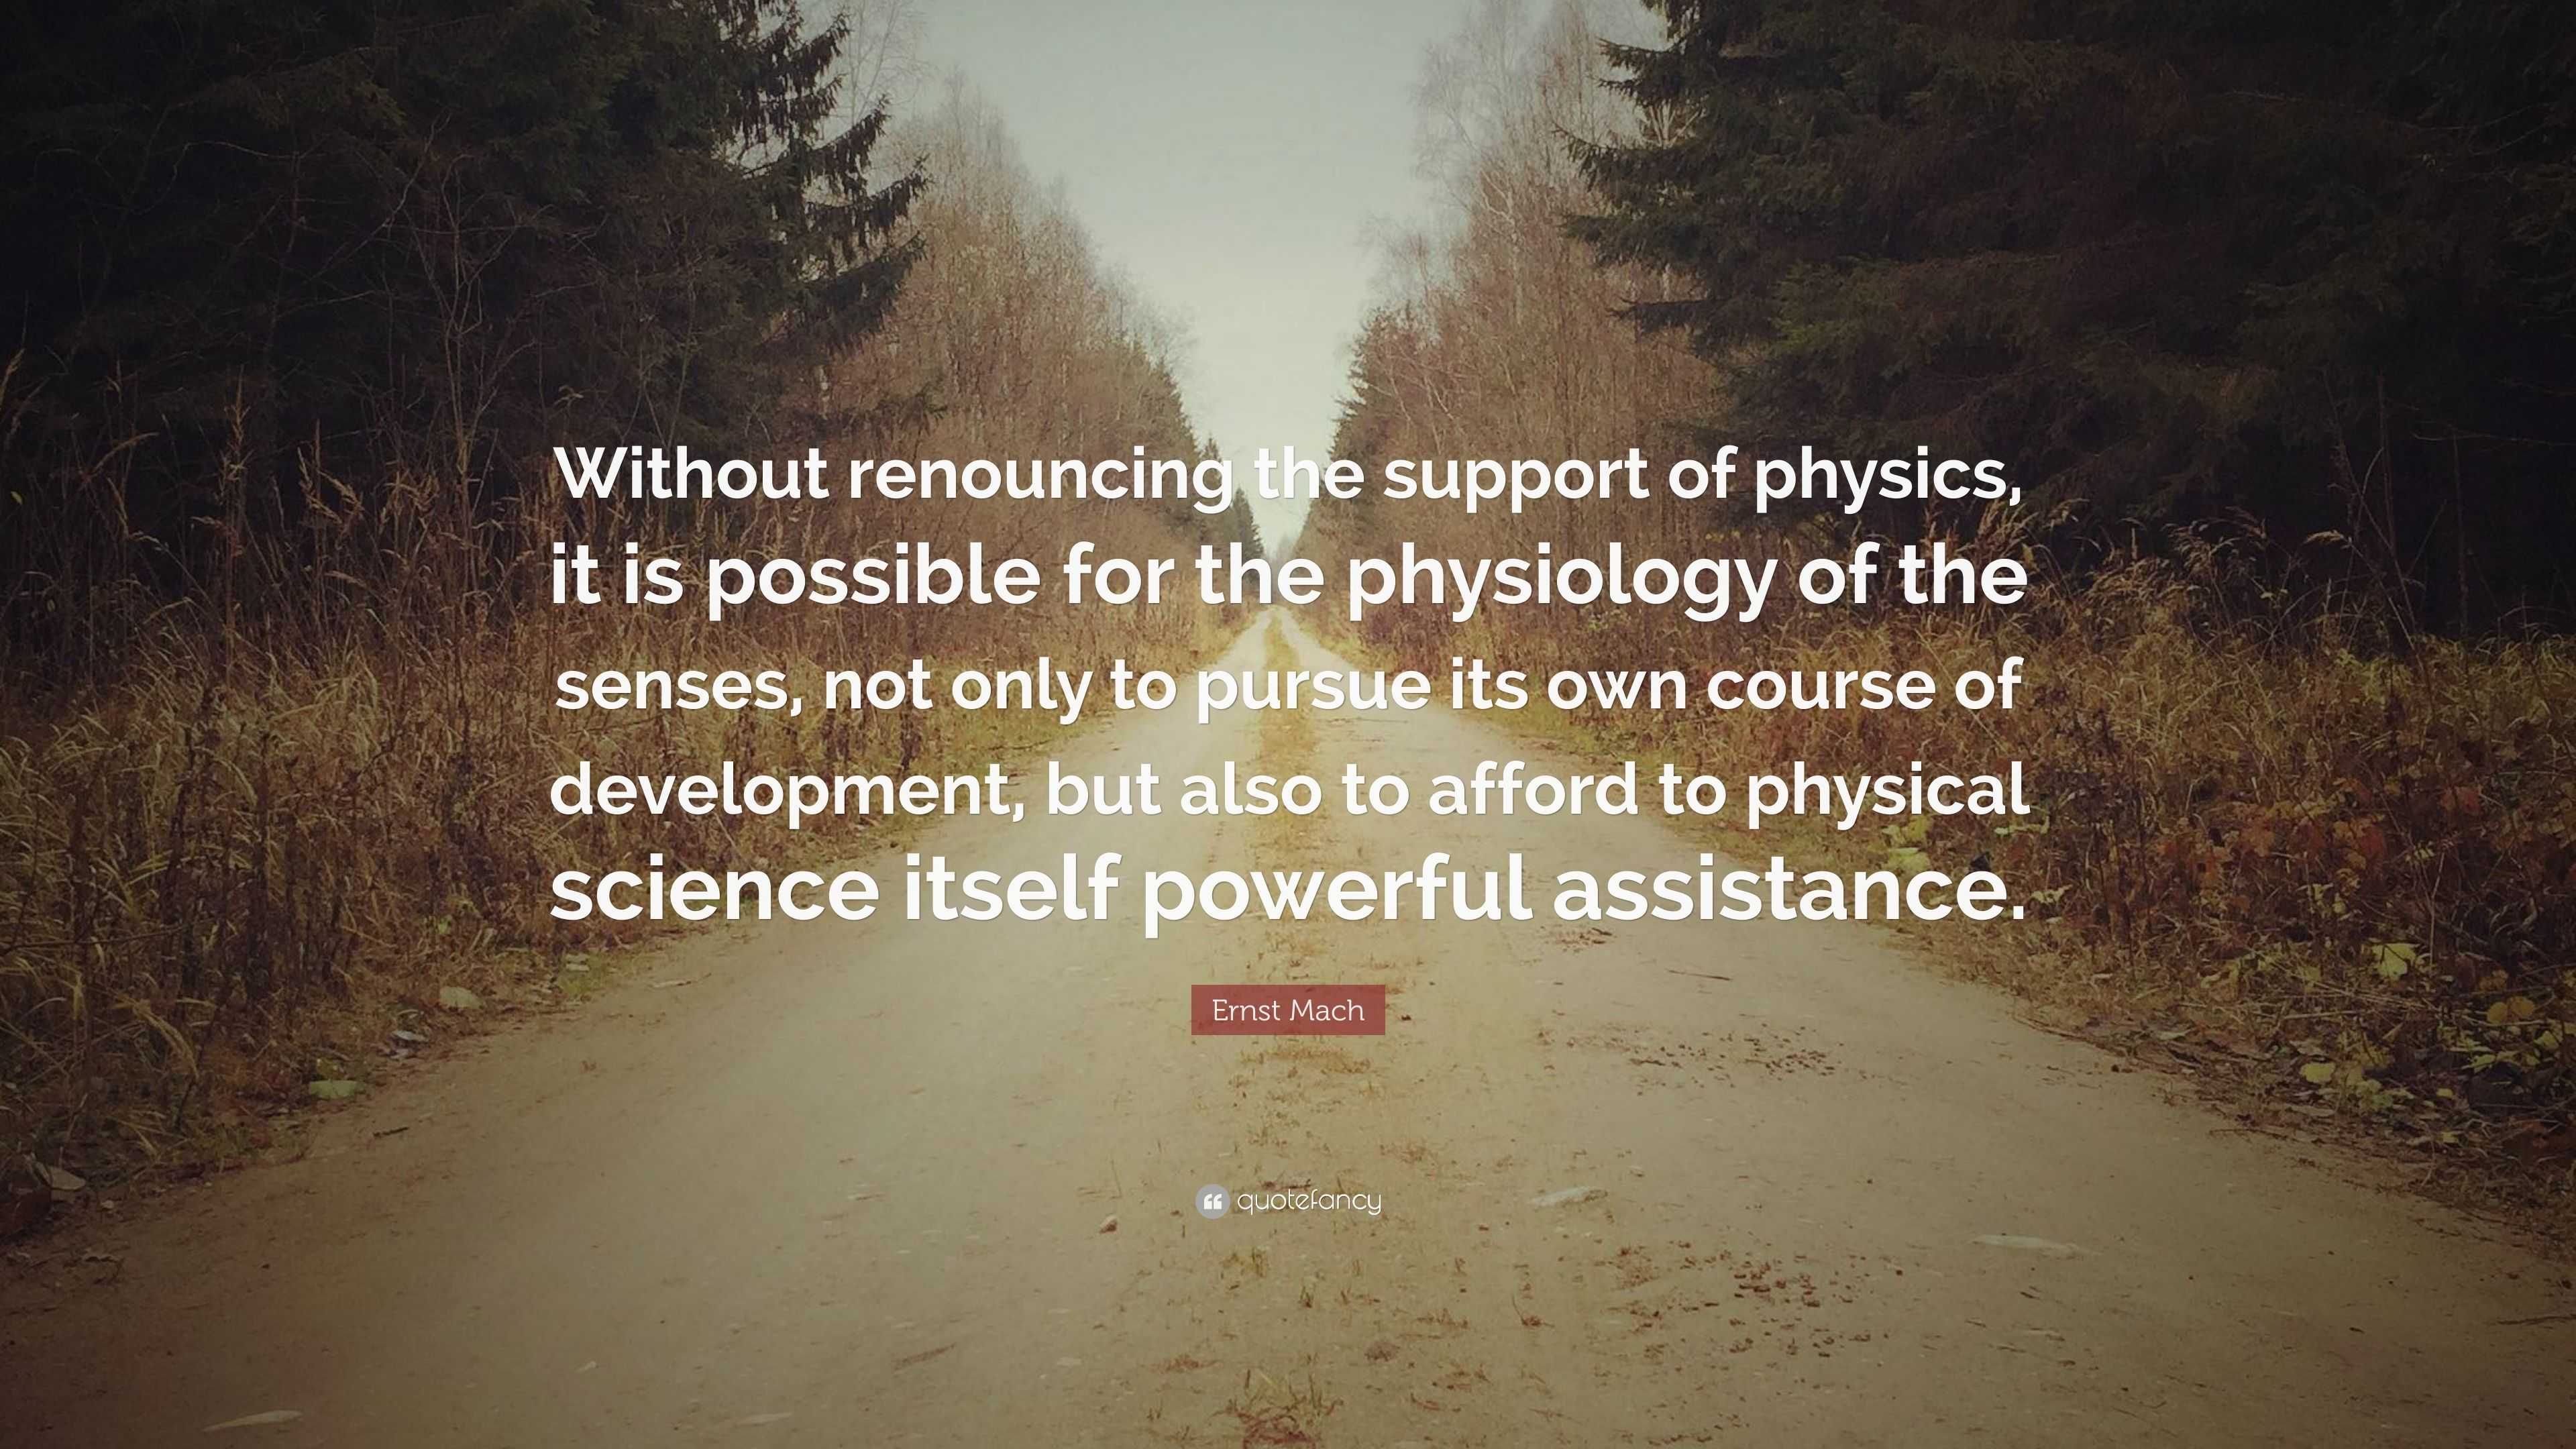 Ernst Mach Quote “without Renouncing The Support Of Physics It Is Possible For The Physiology